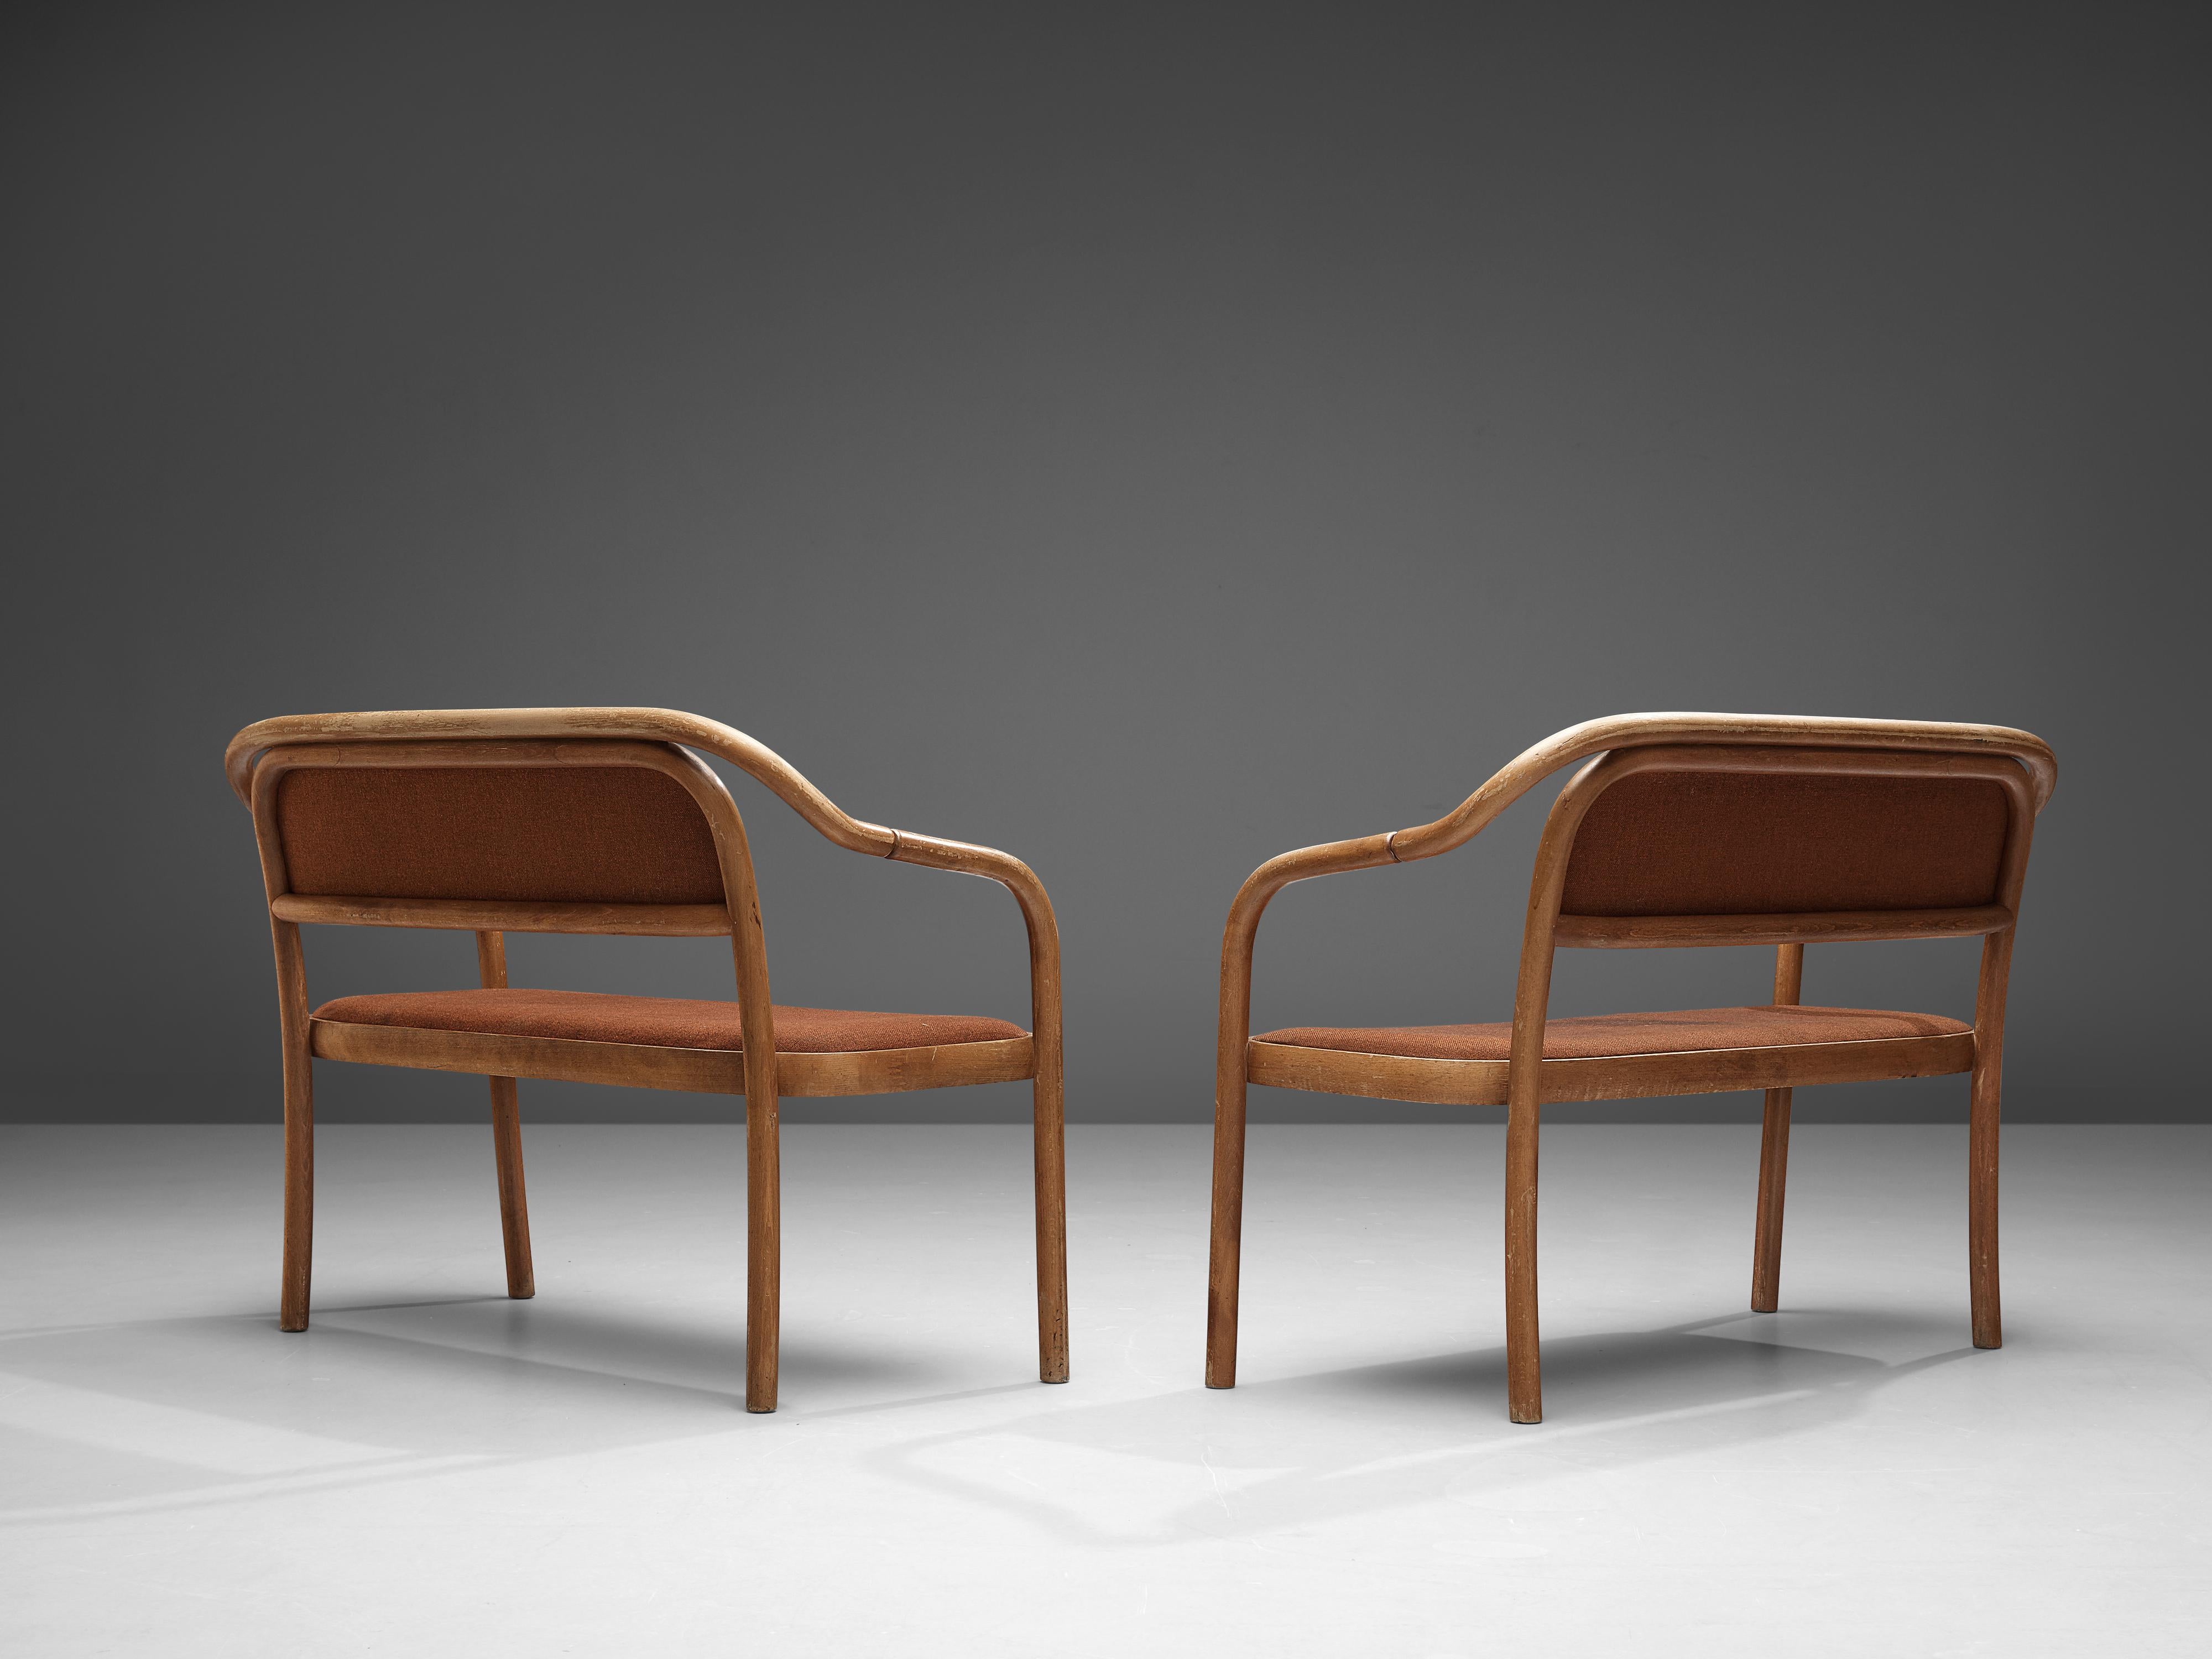 Antonín Šuman for TON, benches, bentwood, fabric upholstery, Czech Republic, 1977

Admirable benches designed by Antonín Šuman and manufactured by TON in the 1970s. The bench features a wonderful bentwood frame. Engraved rings add a subtle detail